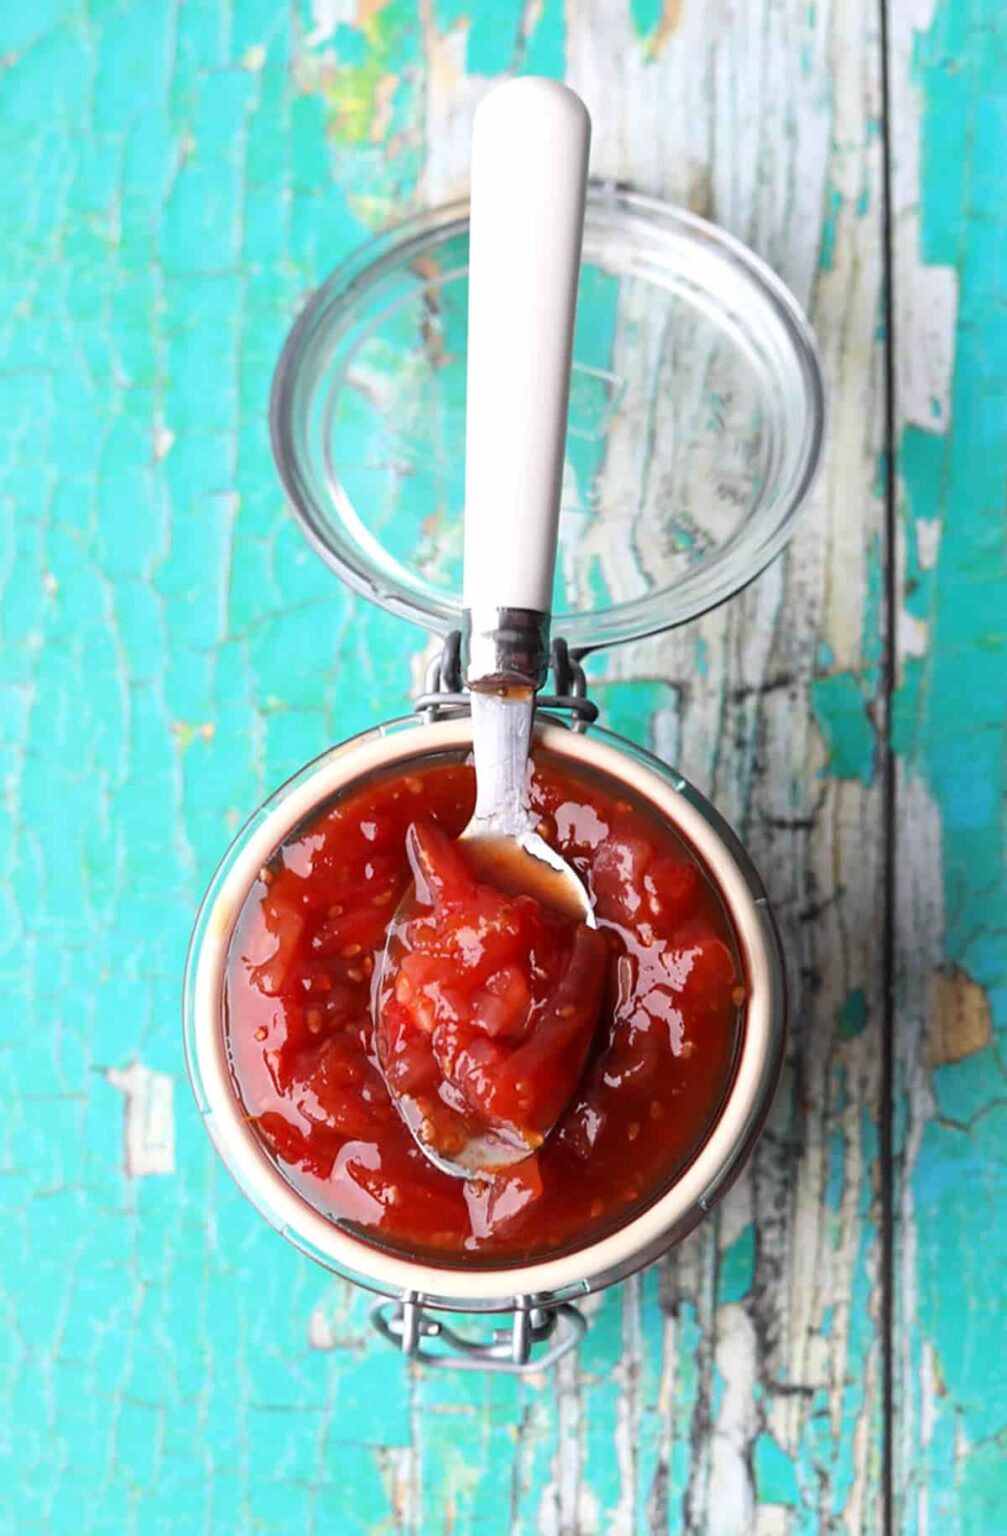 Simple Tomato Chutney Jar With Spoon On Top 1 Of 1 1007x1536 